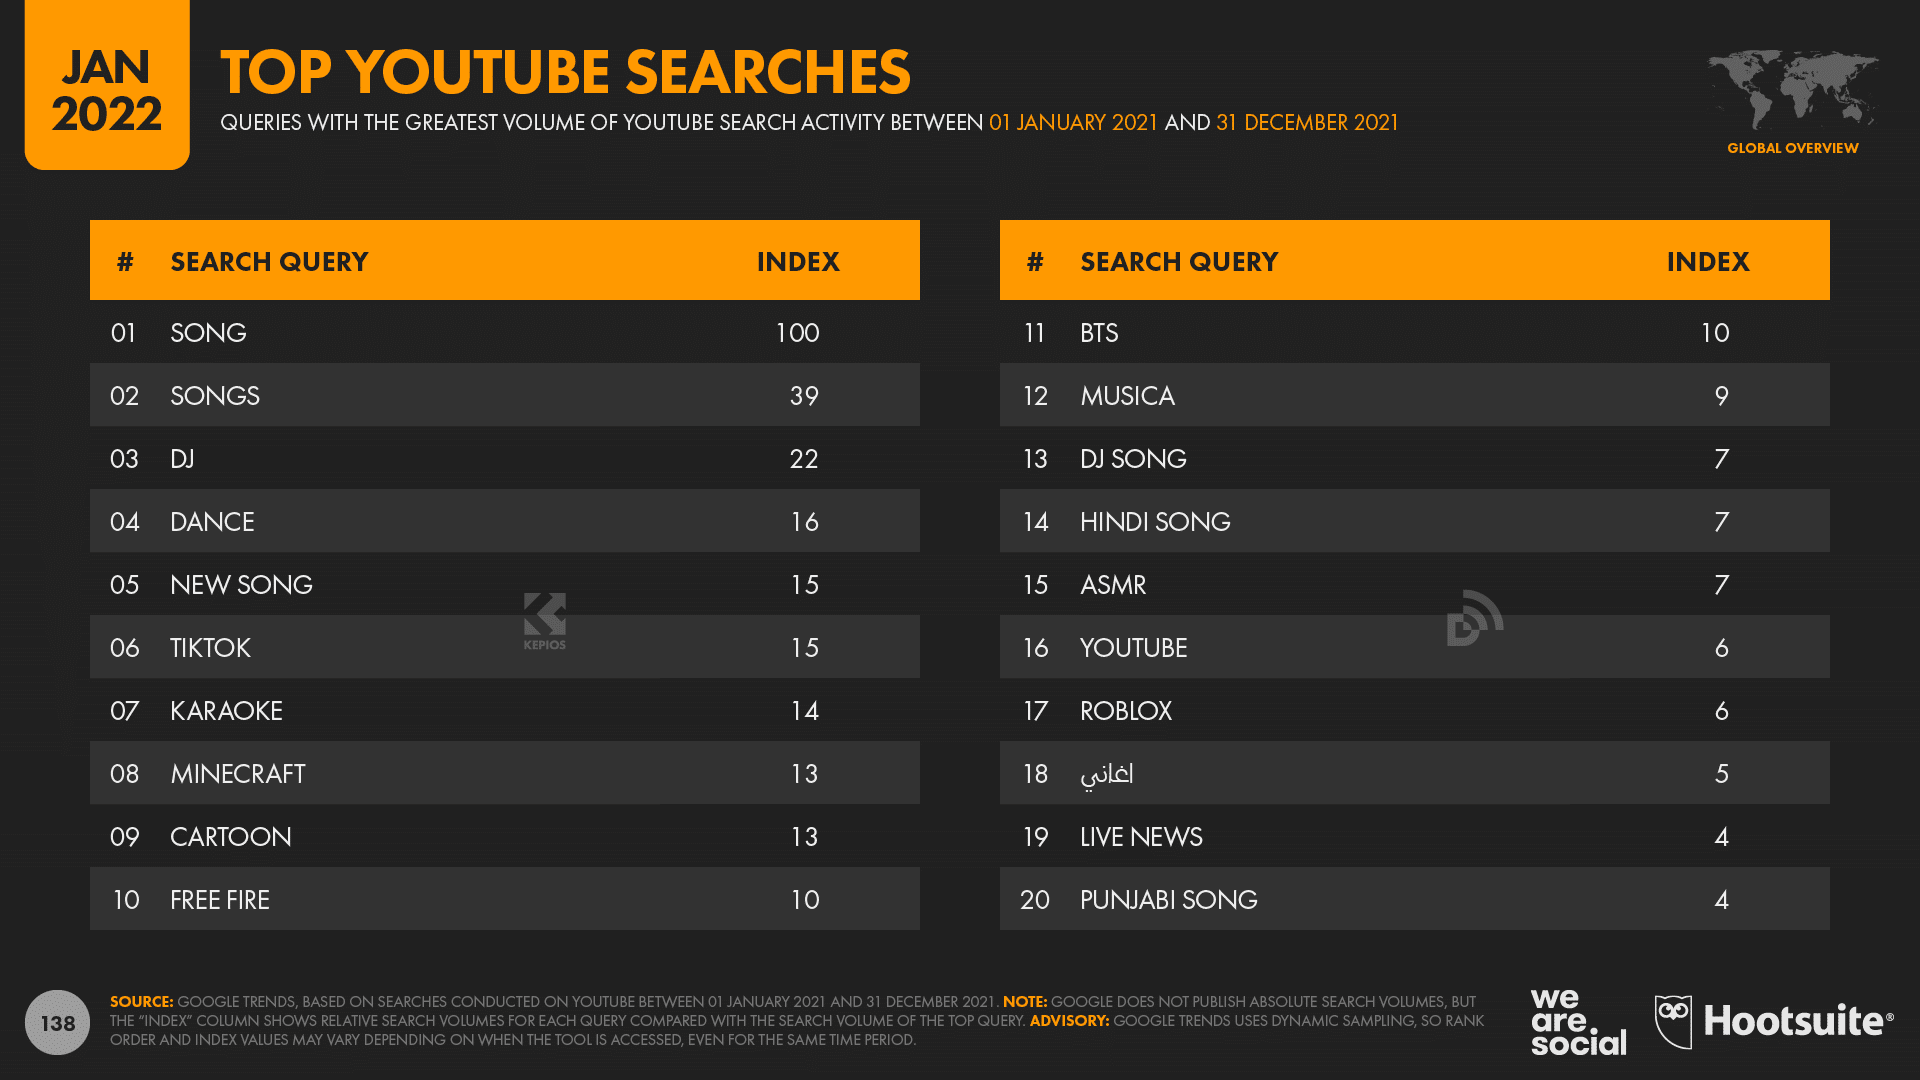 chart showing top YouTube searches